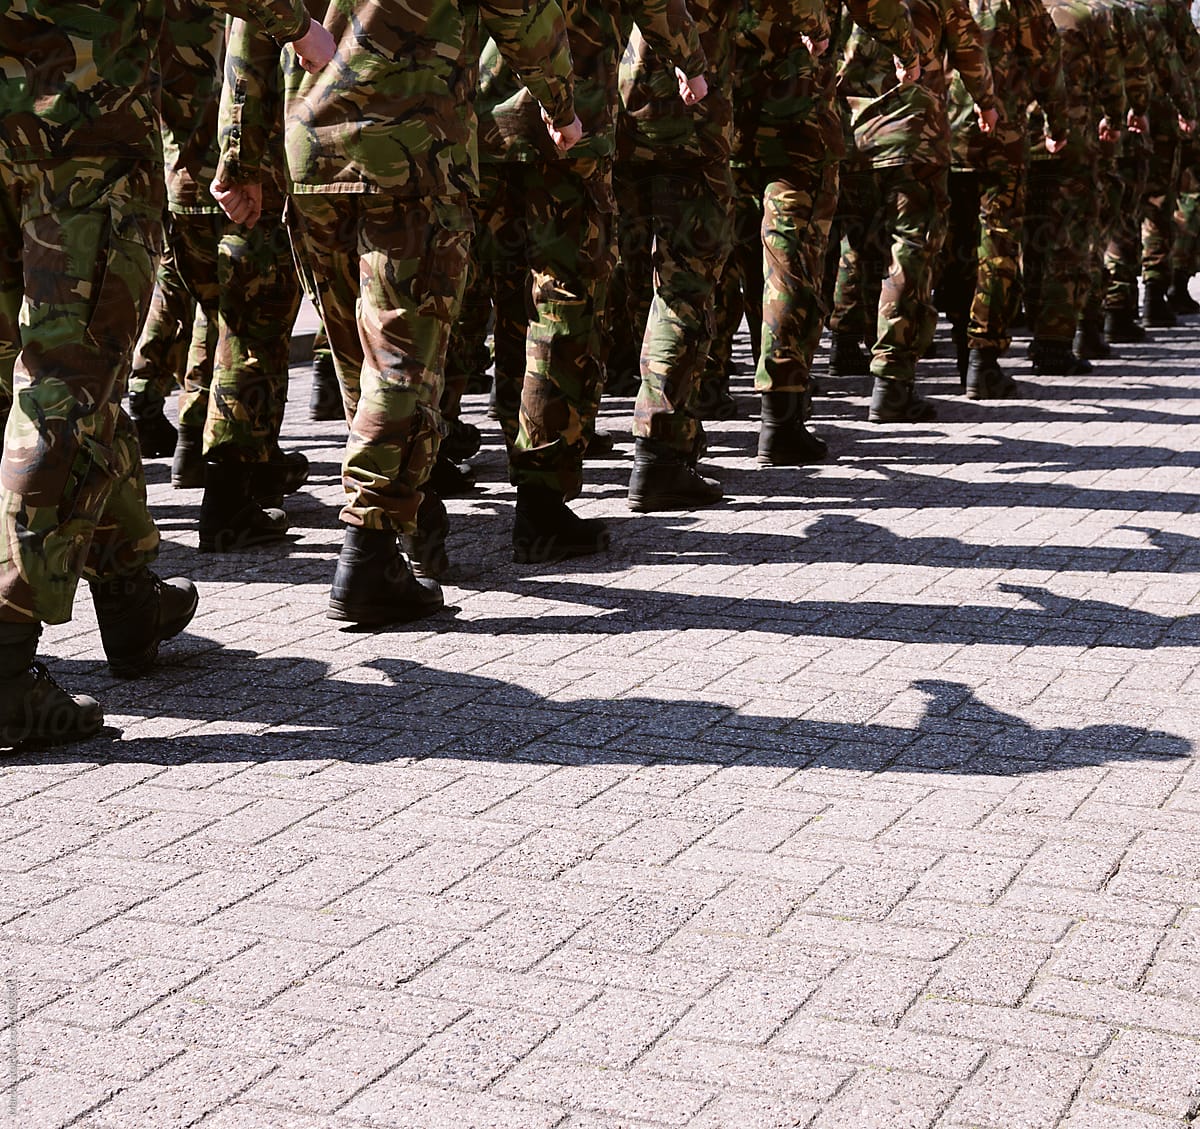 marching soldiers and their shadows